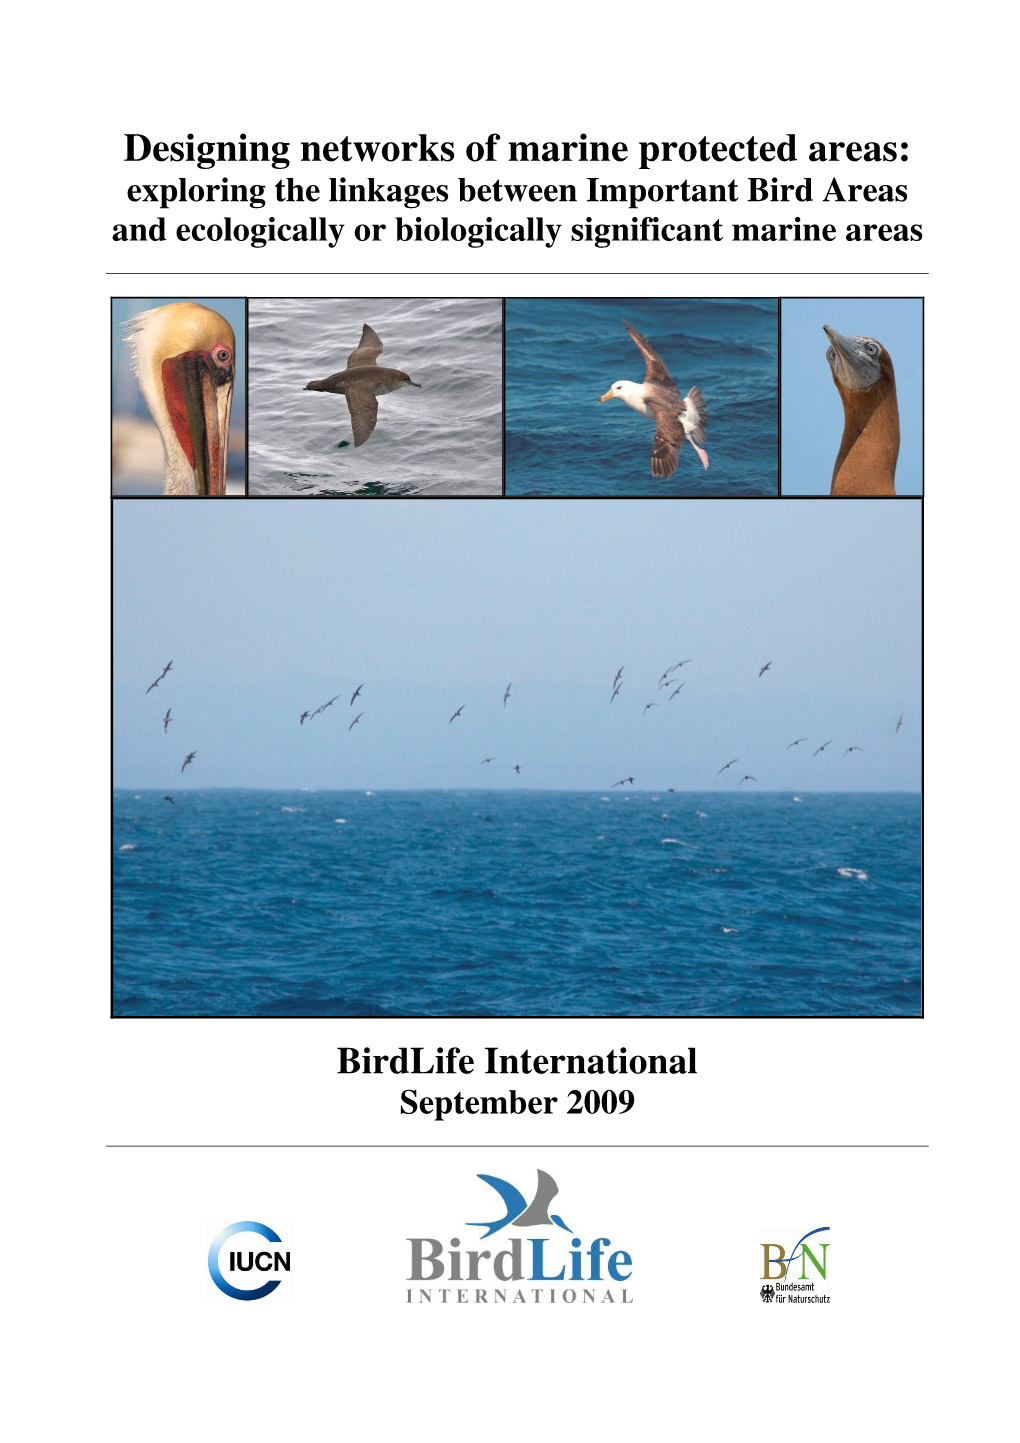 Designing Networks of Marine Protected Areas: Exploring the Linkages Between Important Bird Areas and Ecologically Or Biologically Significant Marine Areas